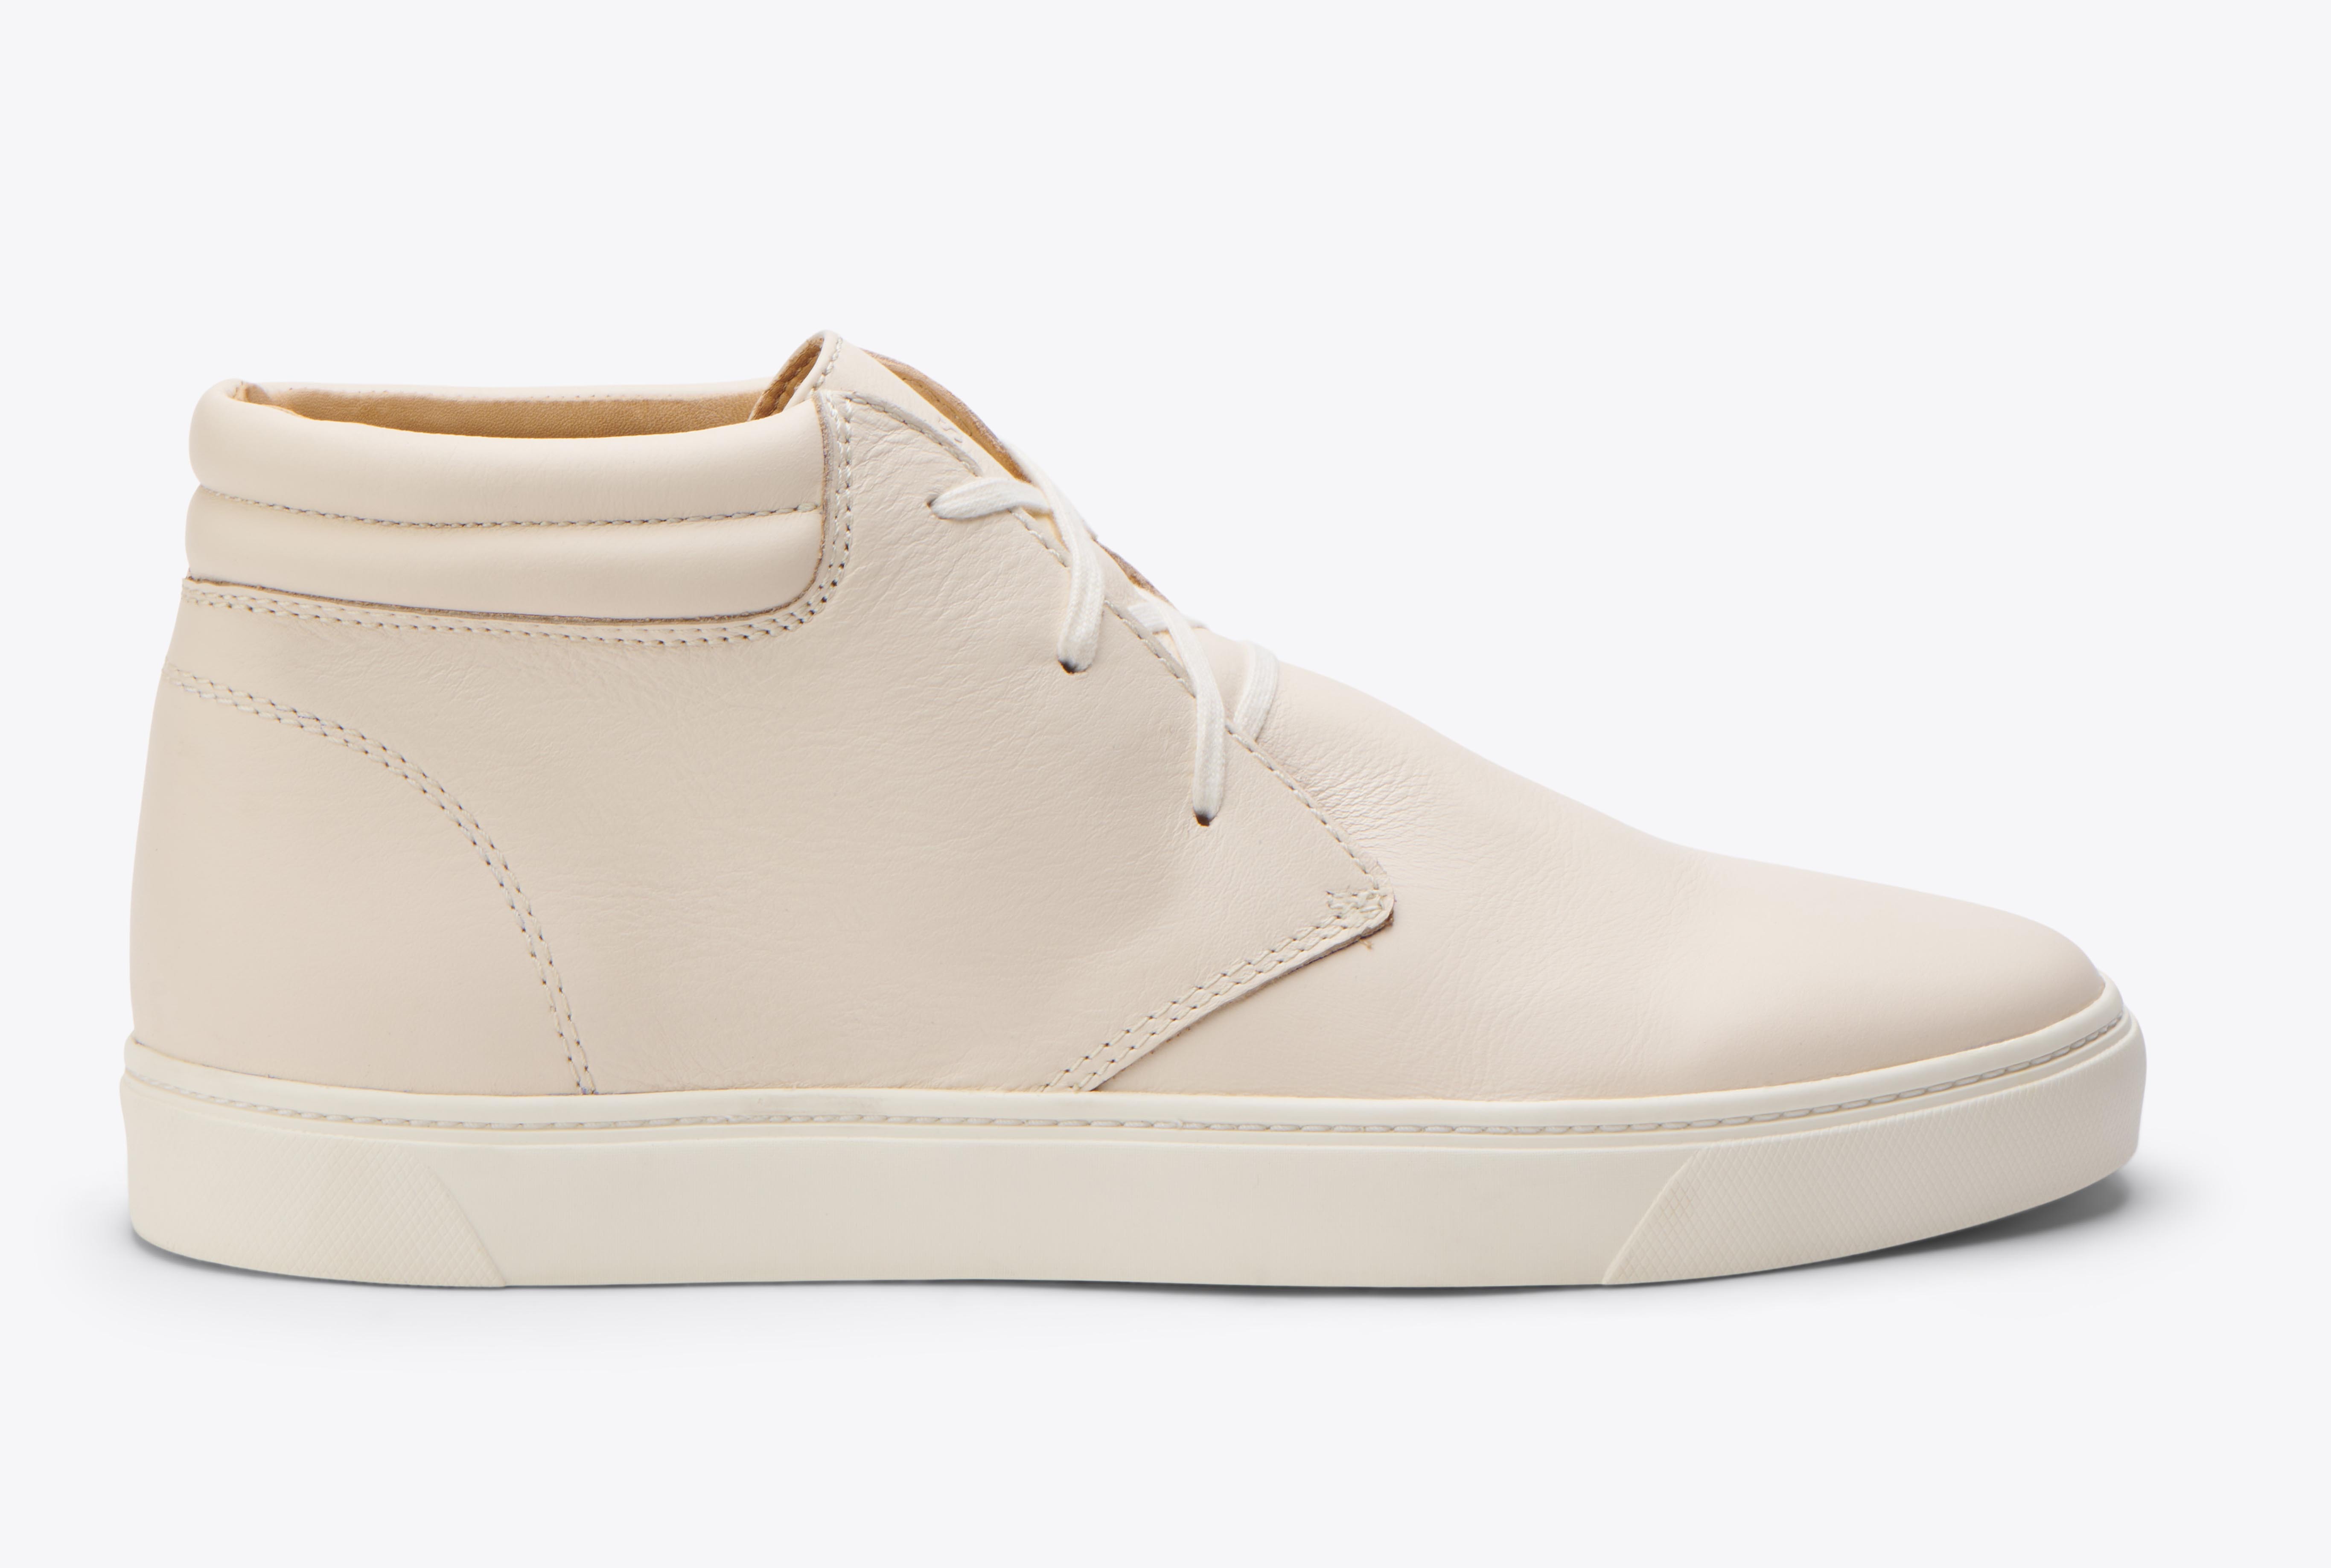 Nisolo Everyday Mid Top Sneaker Bone - Every Nisolo product is built on the foundation of comfort, function, and design. 